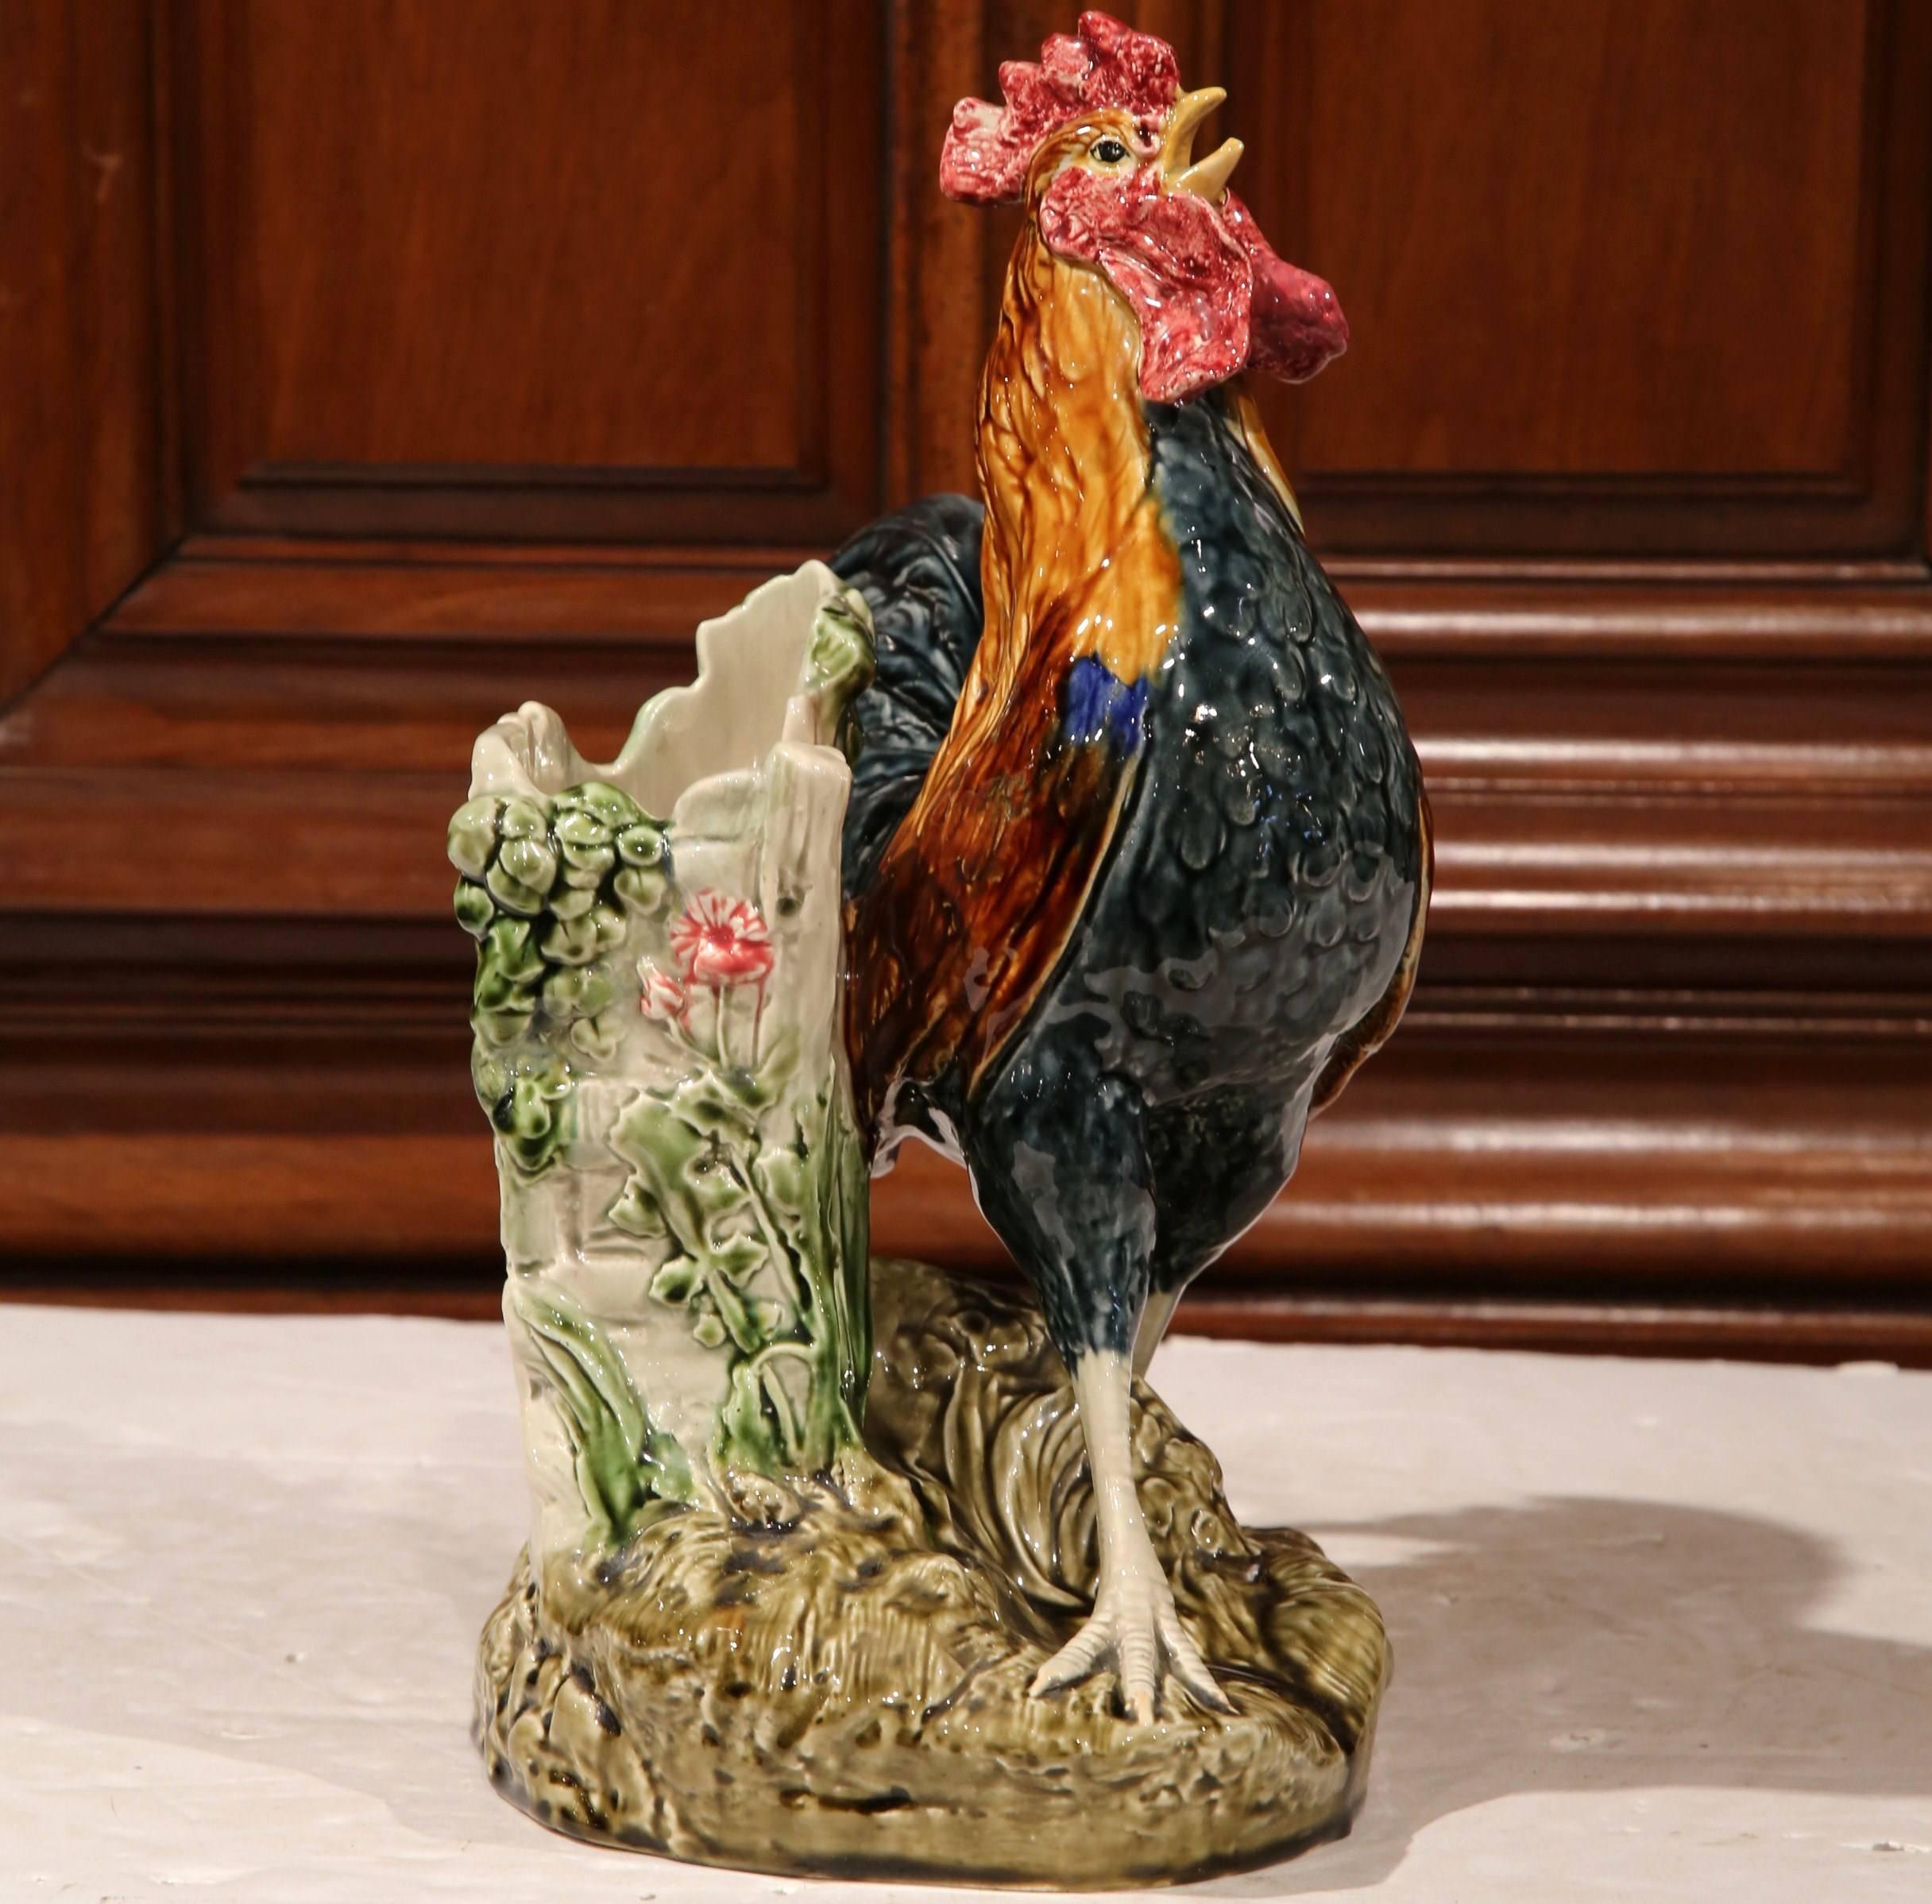 Bring the bucolic beauty of the French countryside into your home with this hand-painted, antique rooster from France, circa 1880. The statement-making rooster is attached to a vase that's perfect for holding flowers. The colorful sculpture is